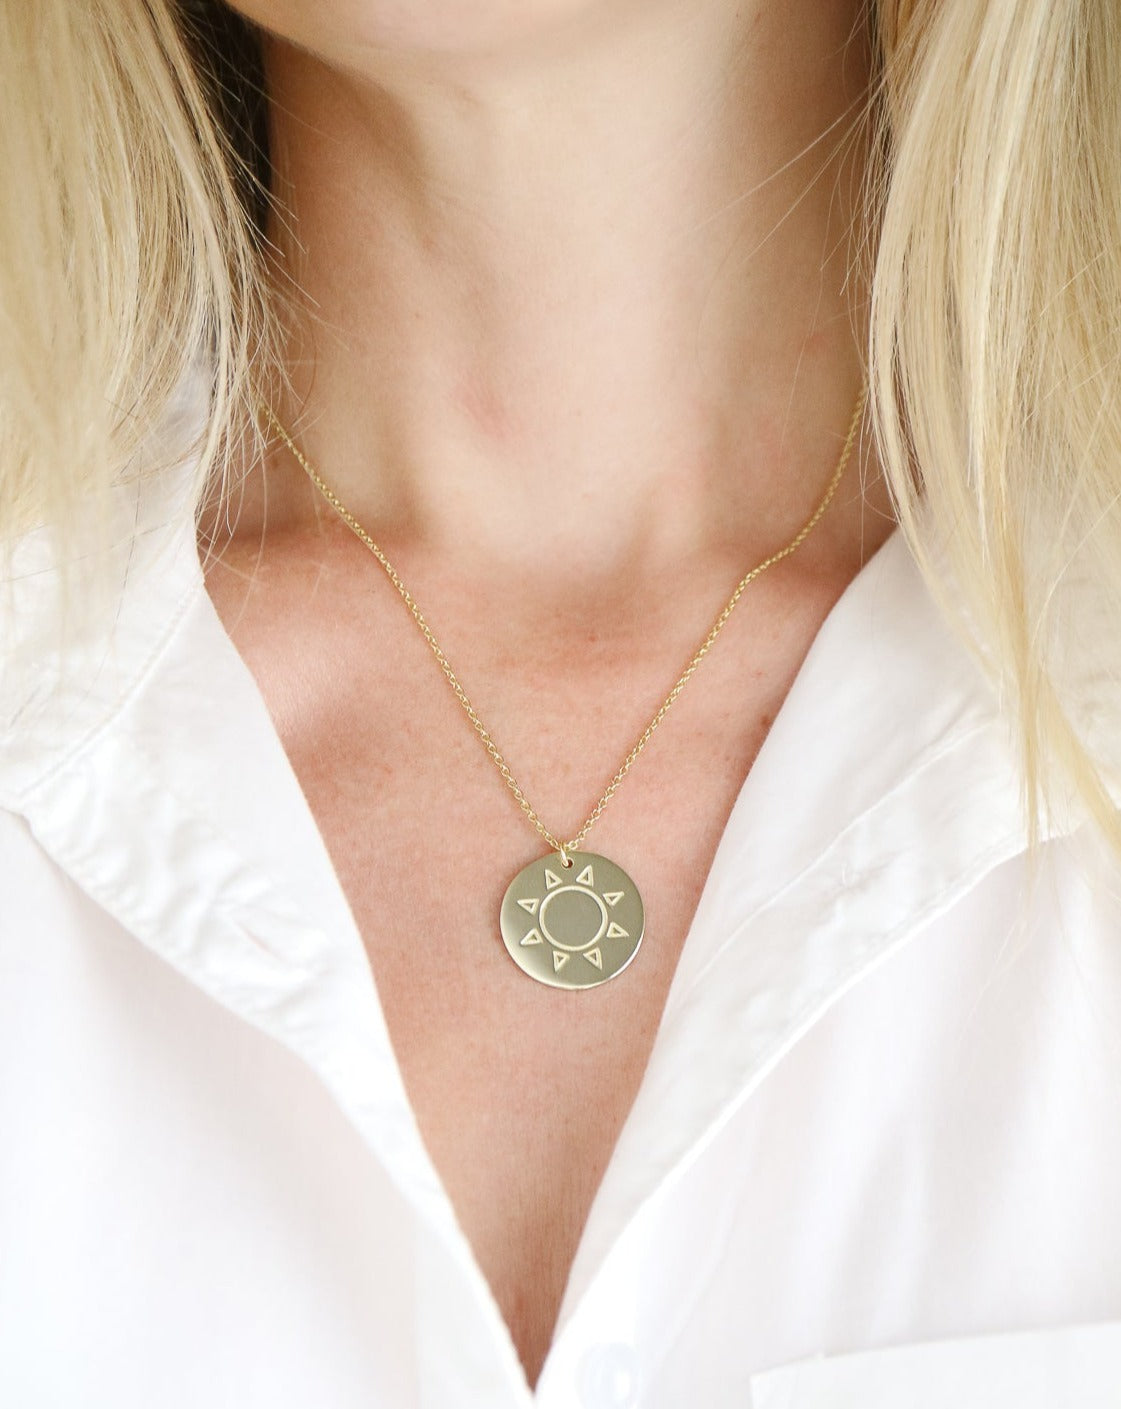 Gold disc necklace on female neck